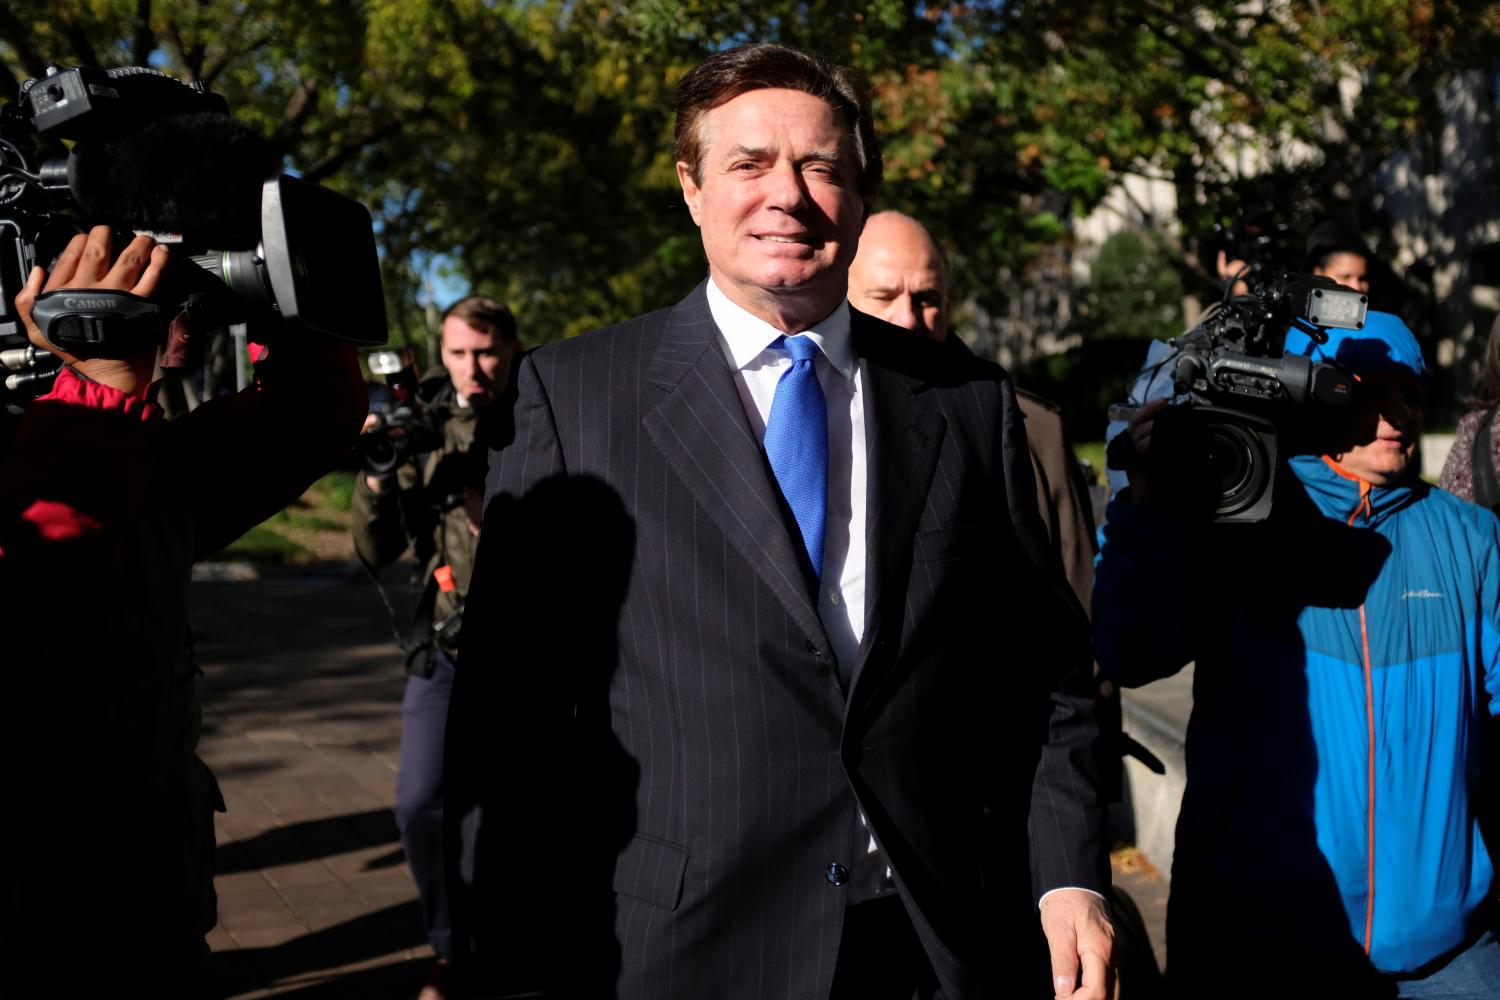 Former Trump 2016 campaign chairman Paul Manafort leaves U.S. Federal Court after being arraigned on twelve federal charges in the investigation into alleged Russian meddling in the 2016 U.S. presidential election in Washington, U.S. October 30, 2017. REUTERS/James Lawler Duggan - RC1F3BB6DB60